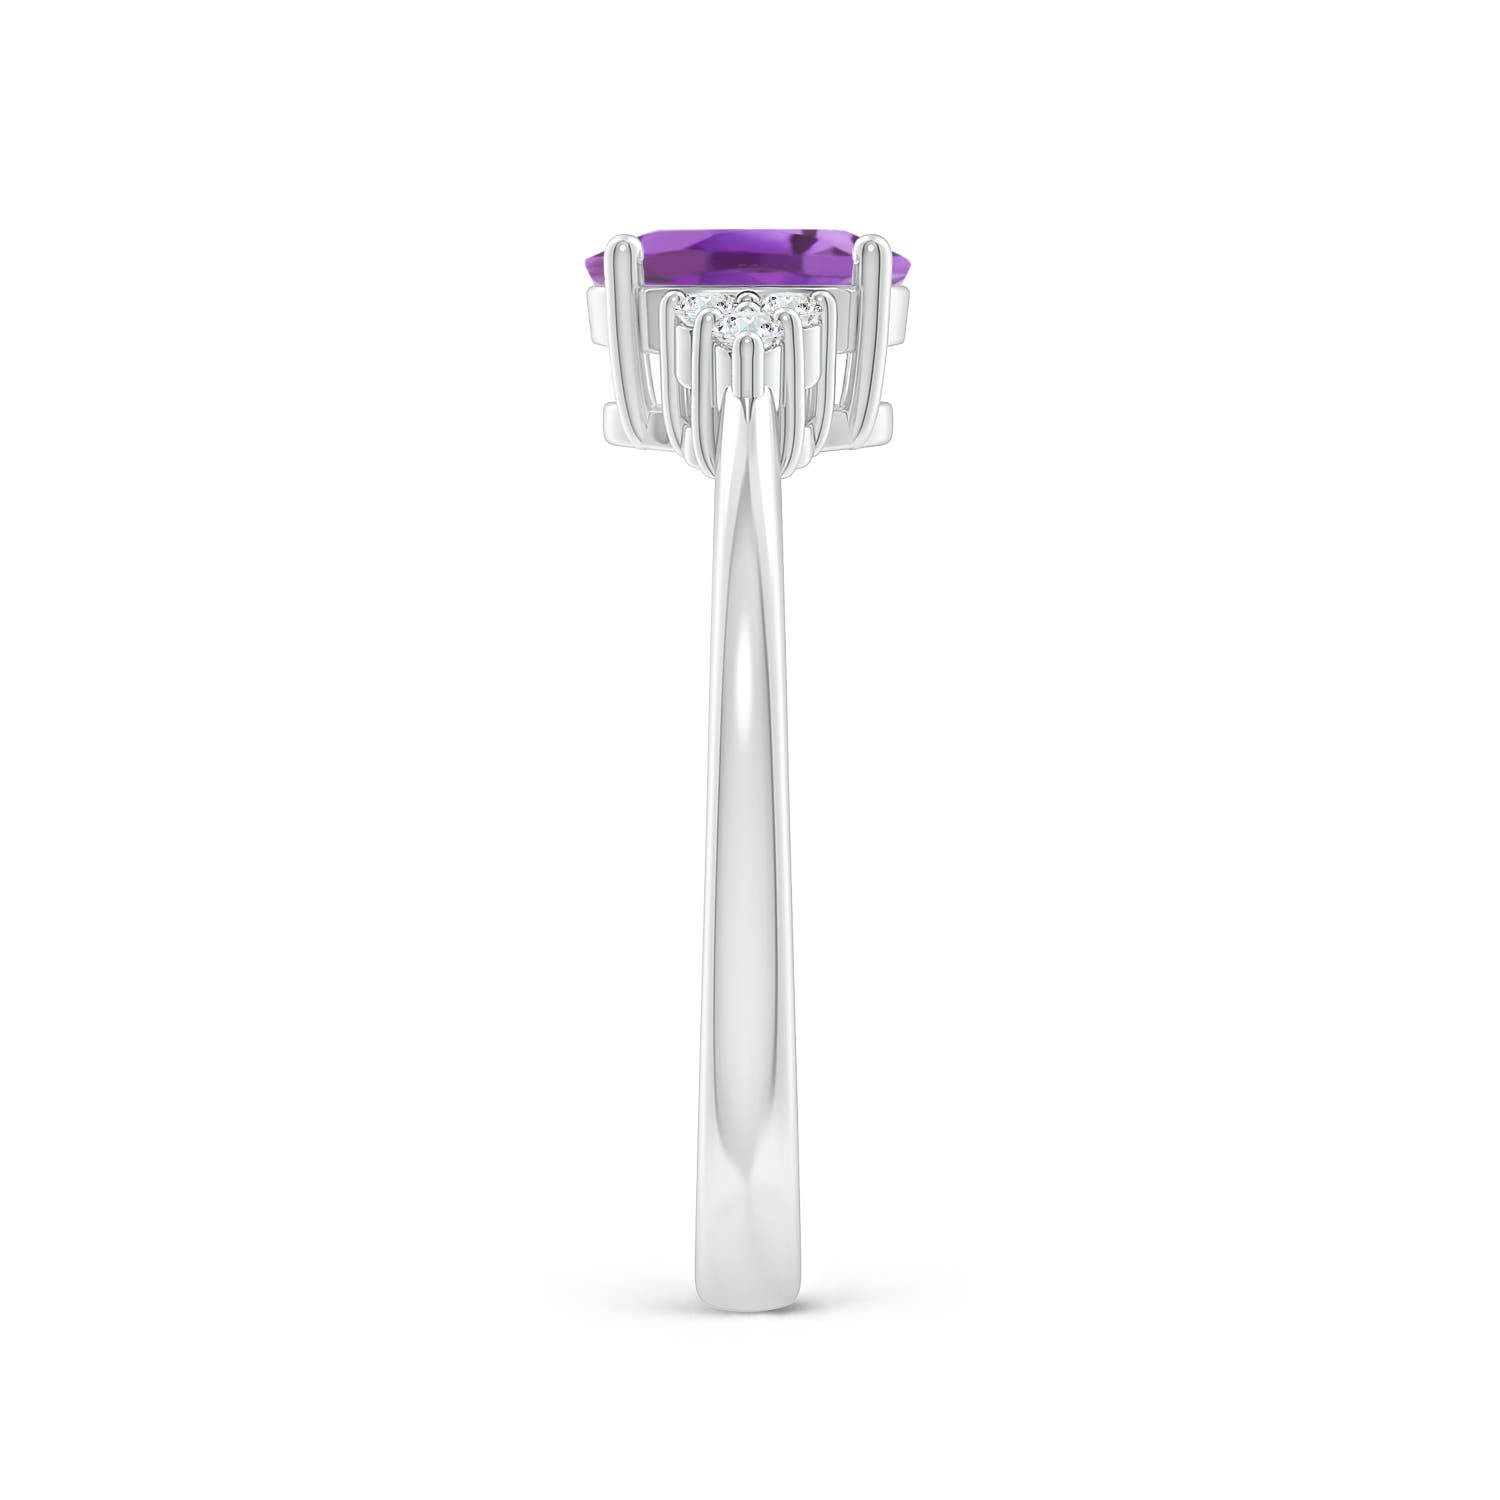 A - Amethyst / 0.78 CT / 14 KT White Gold